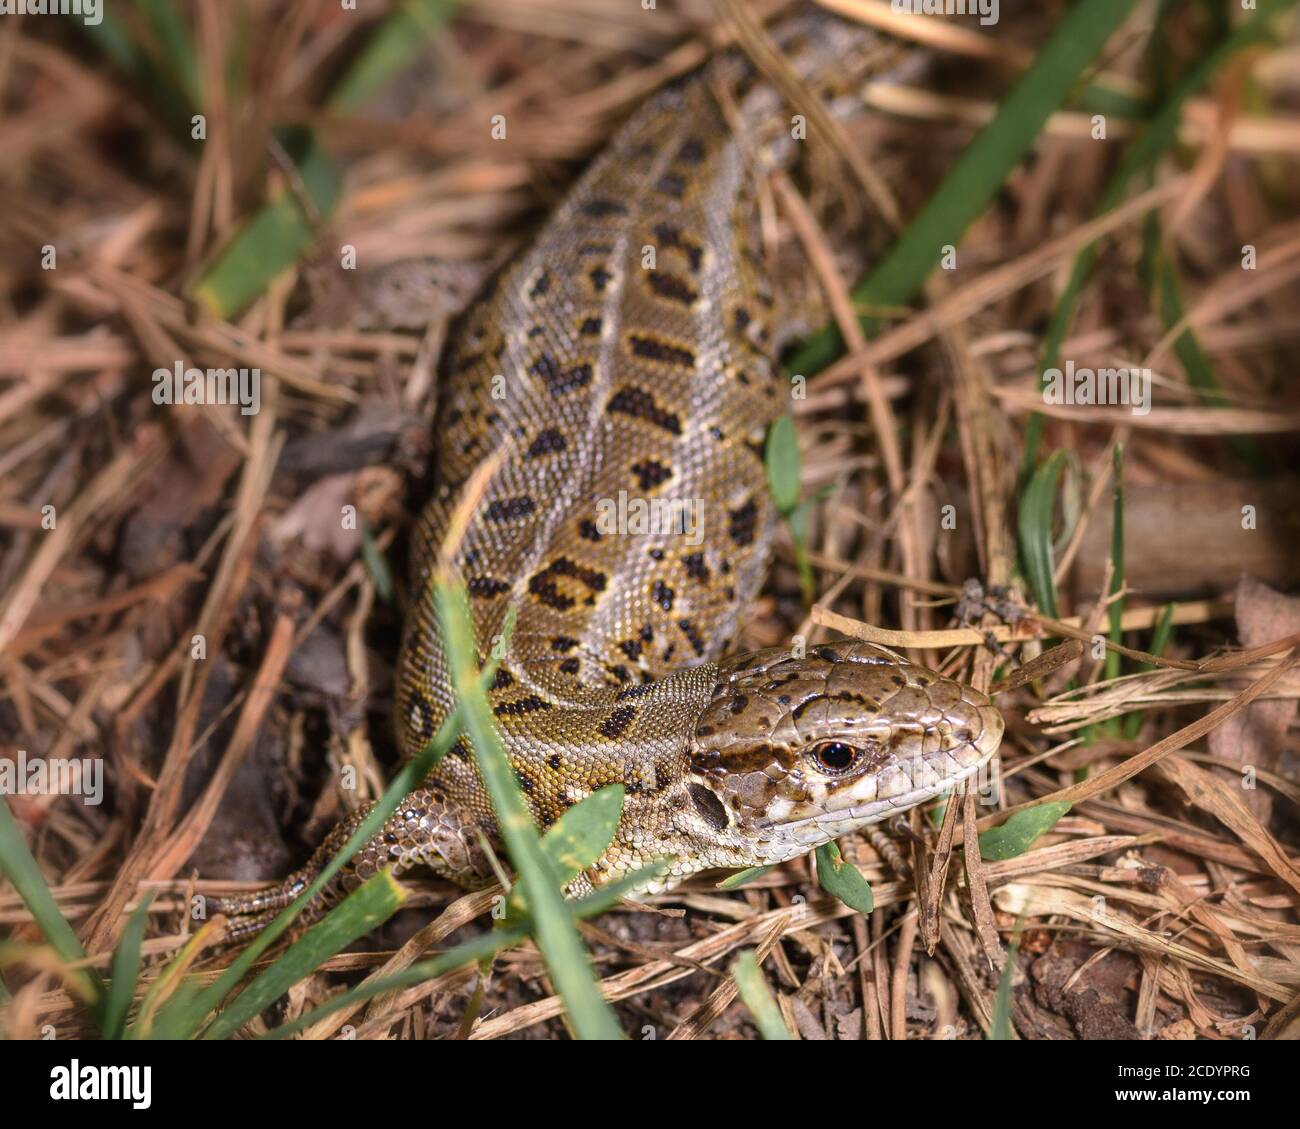 A small lizard in the grass Stock Photo